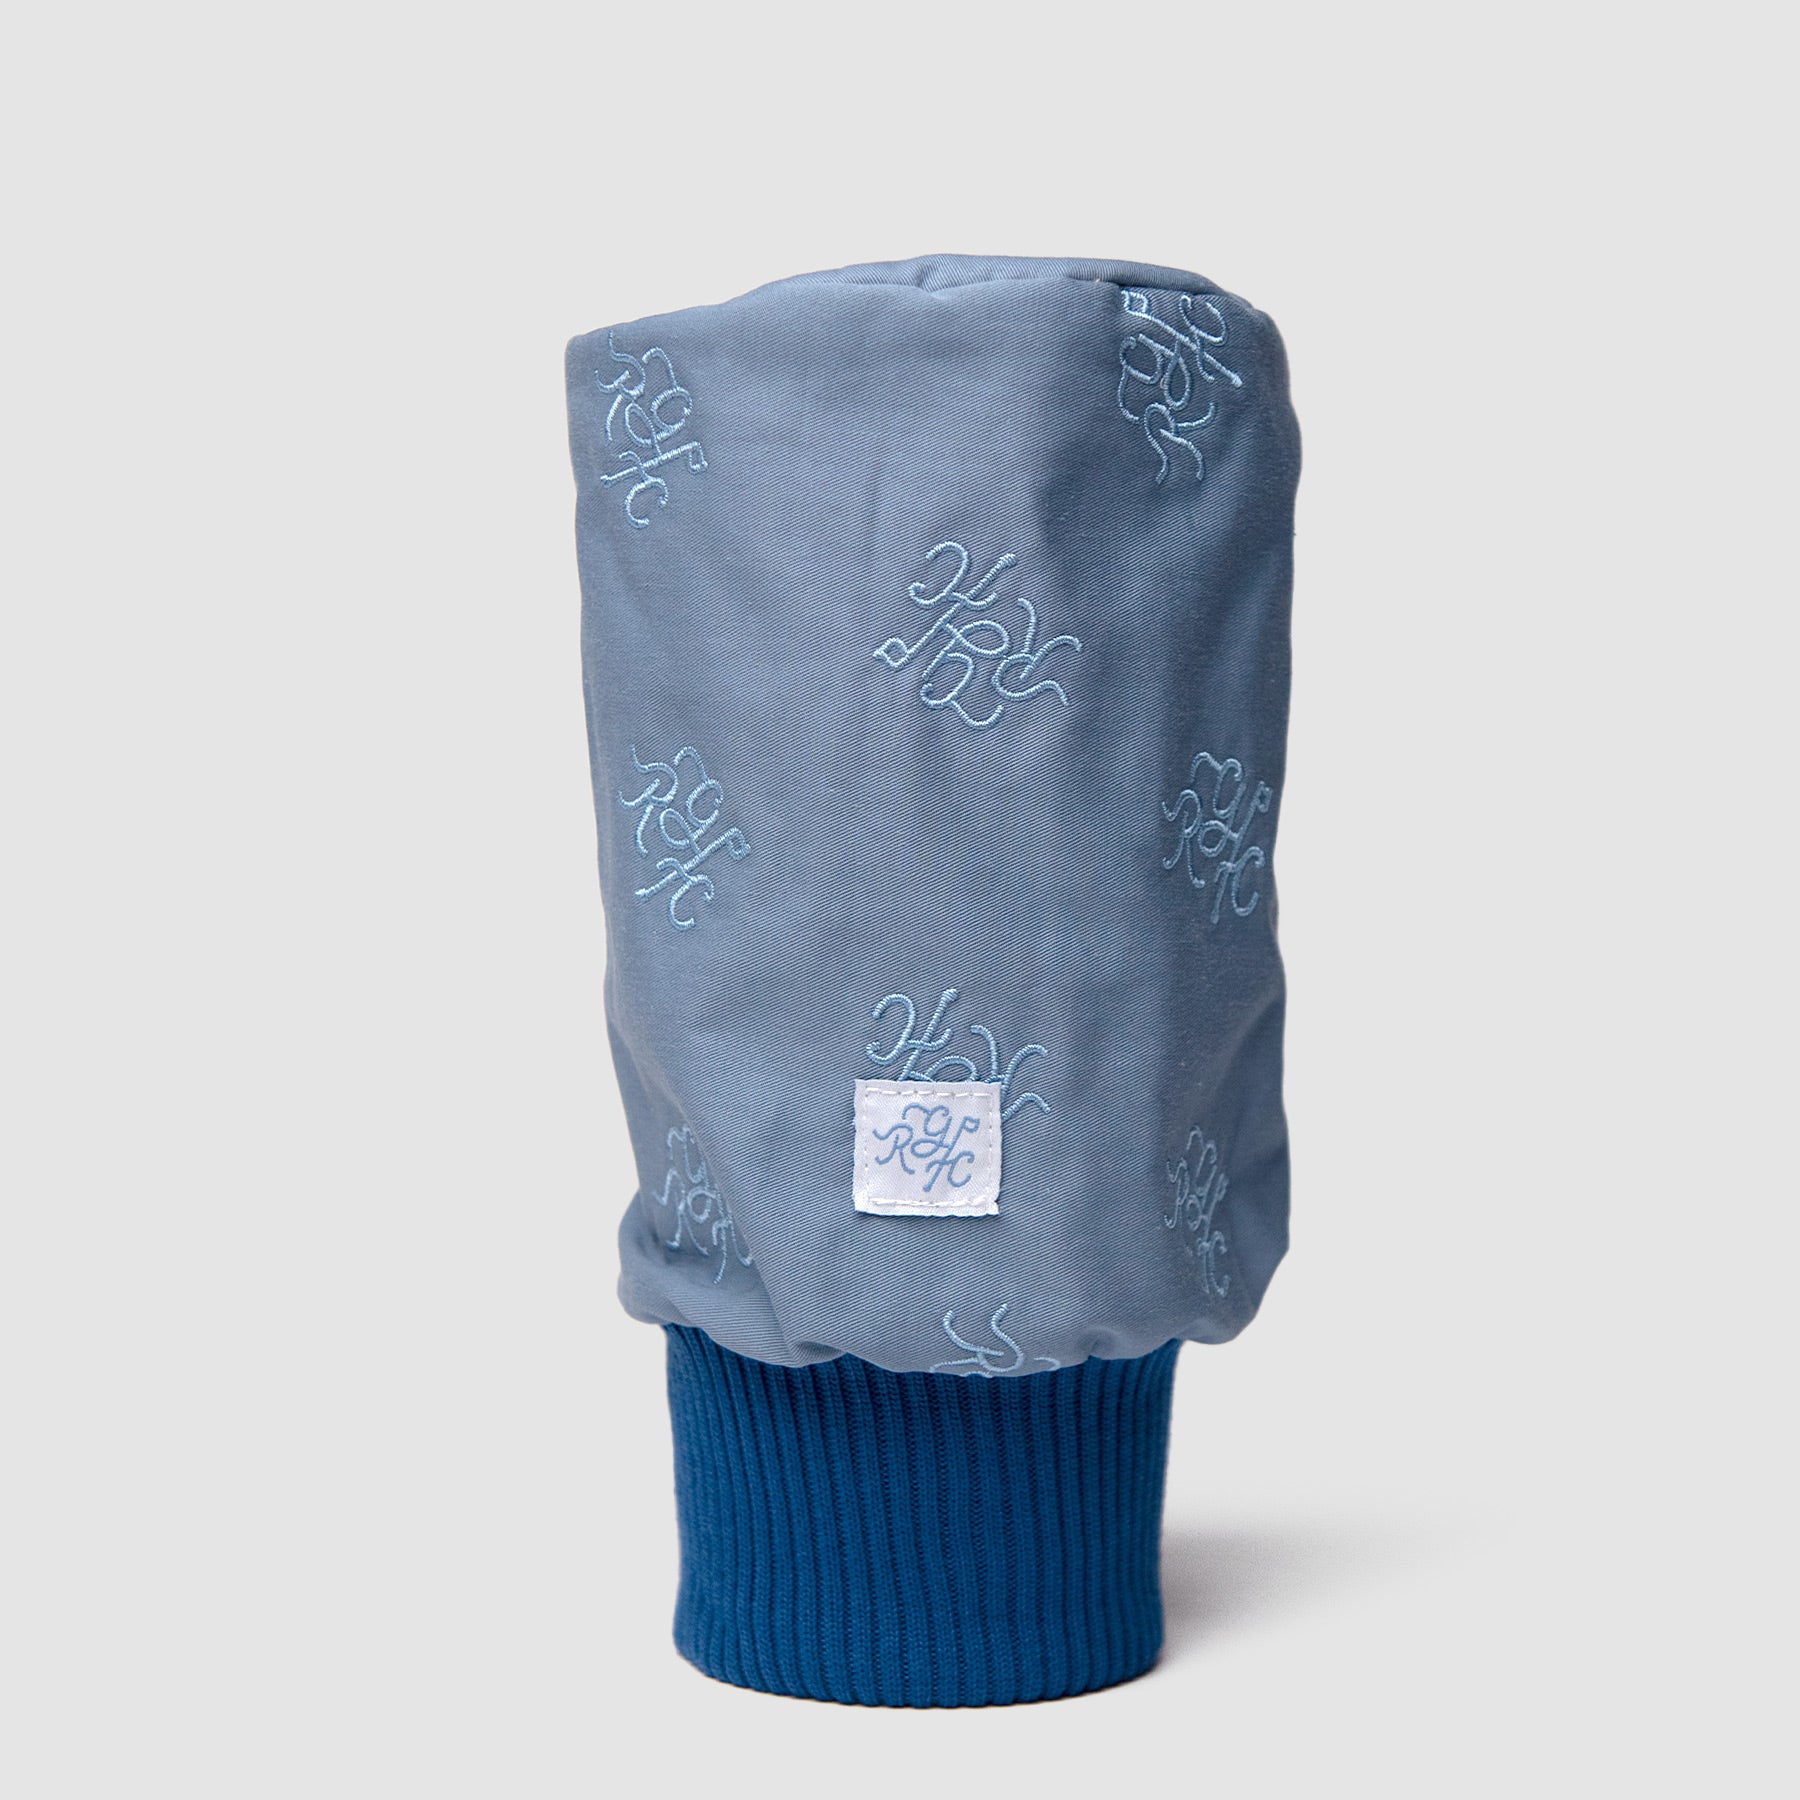 Drizzle Fairway Wood Headcover